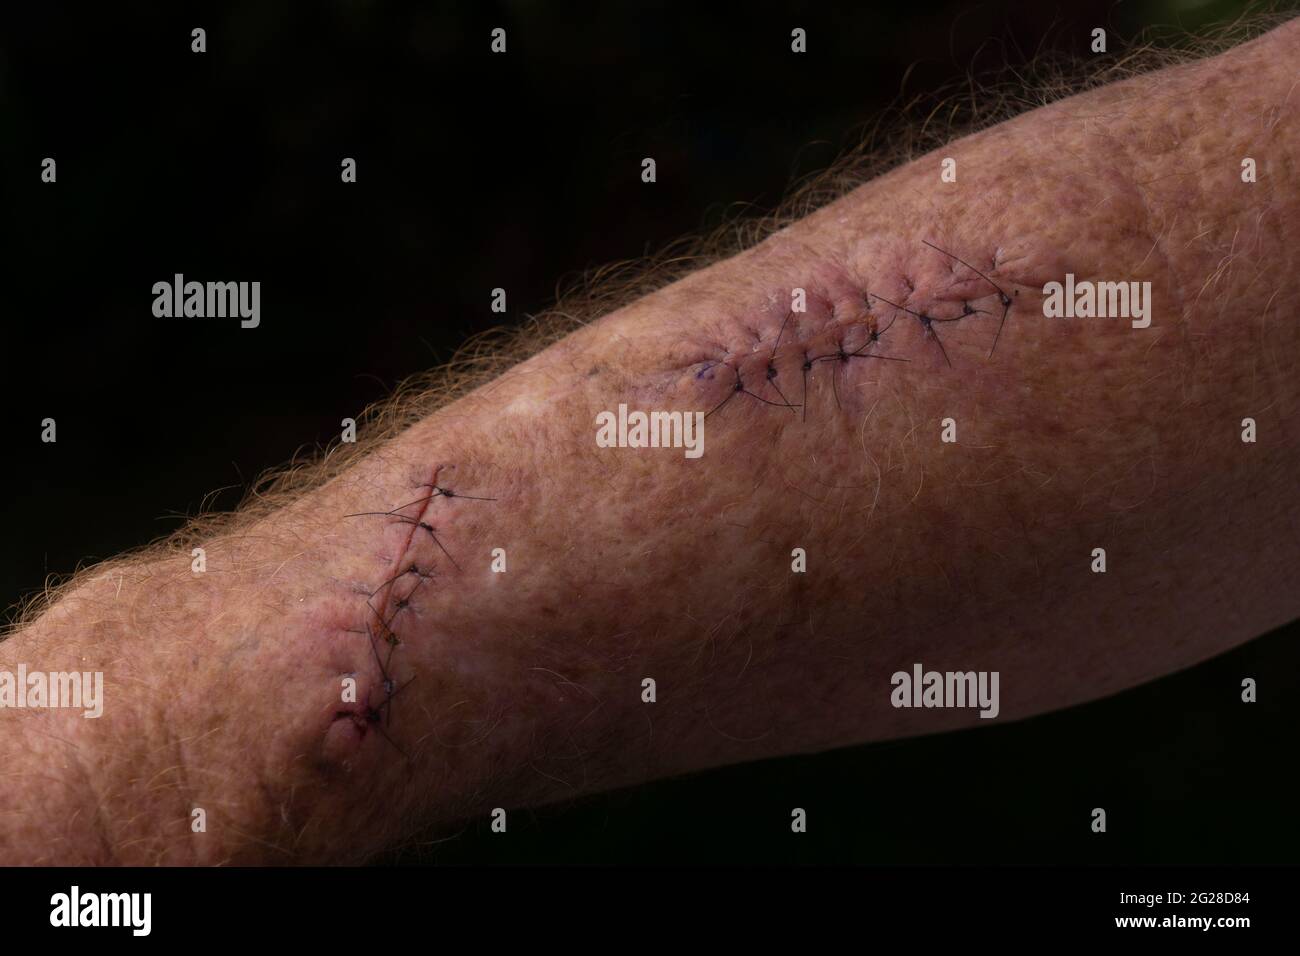 Surgery wounds with sutures and stitches after an operation on the arm of a senior male to remove squamous cell carcinomas or skin cancers which are t Stock Photo